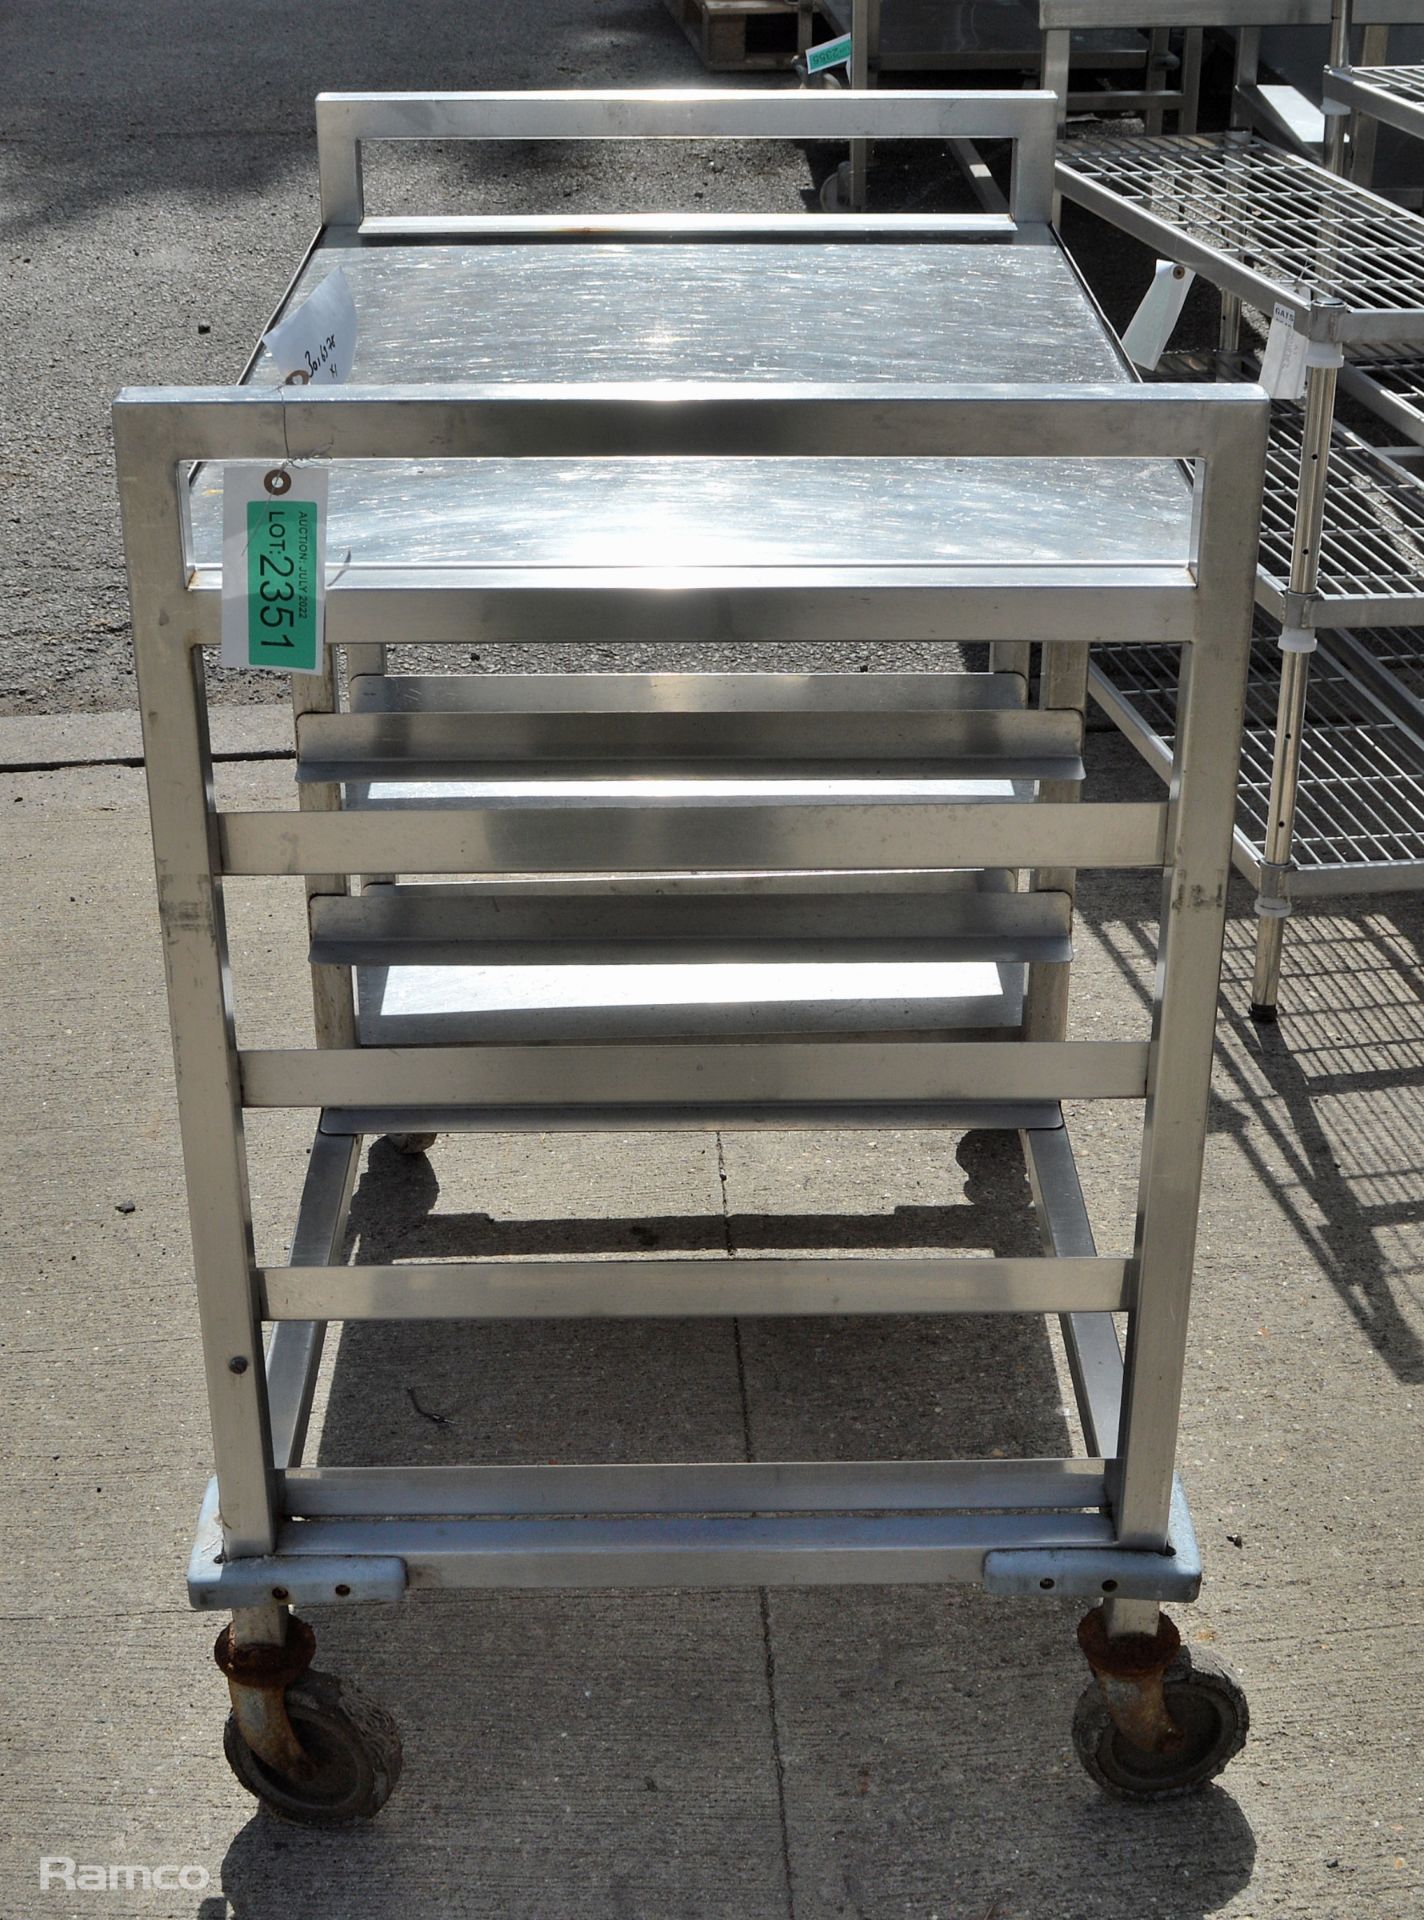 Catering trolley with 7x tray storage L 93 x W 59 x H 95 cm - Image 3 of 5